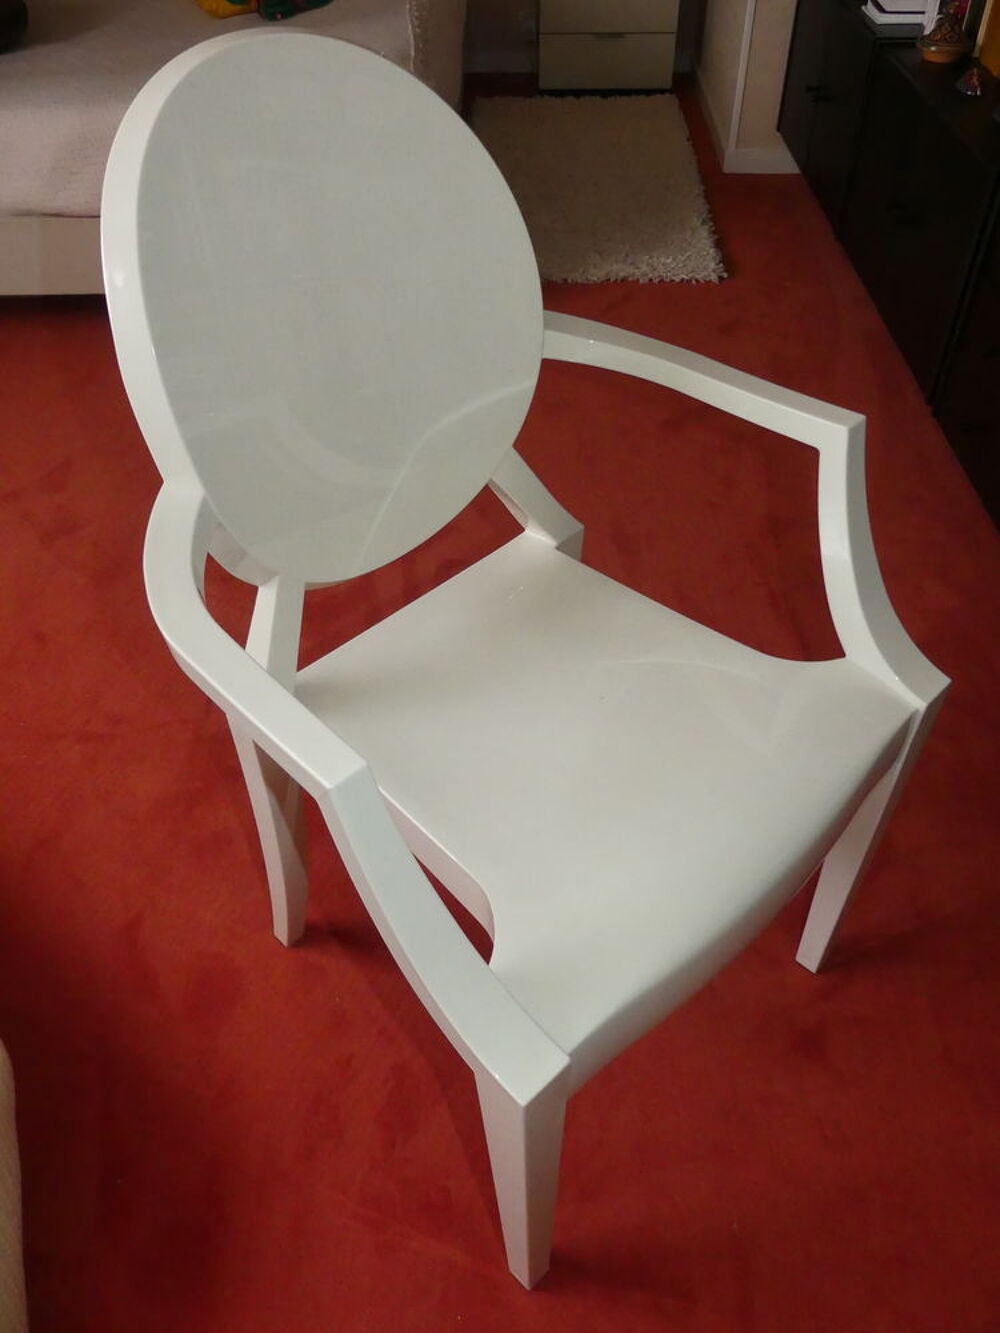 FAUTEUIL LOUIS STYLE GHOST BLANC
Meubles